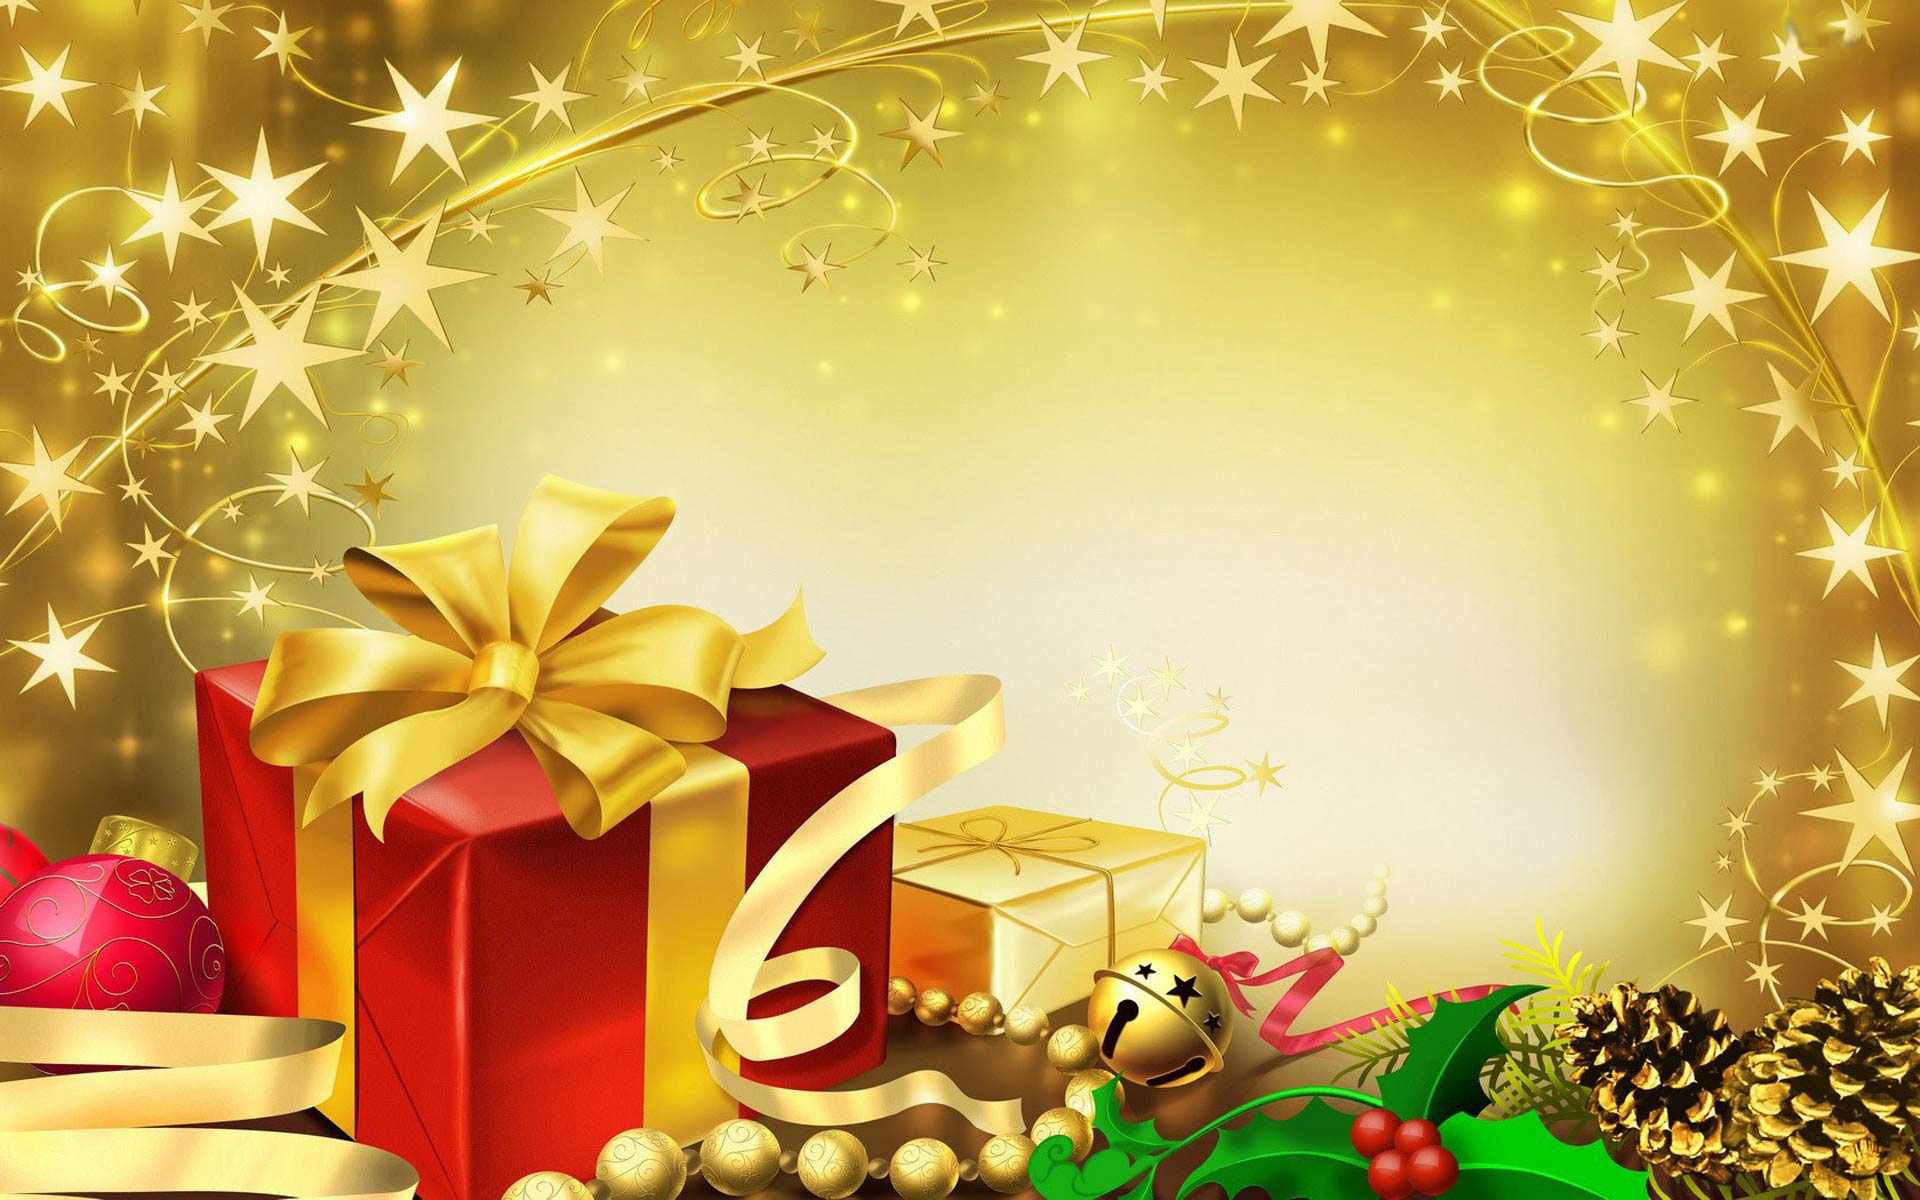 Christmas Wallpaper Widescreen 9951 Hd Wallpapers in Celebrations